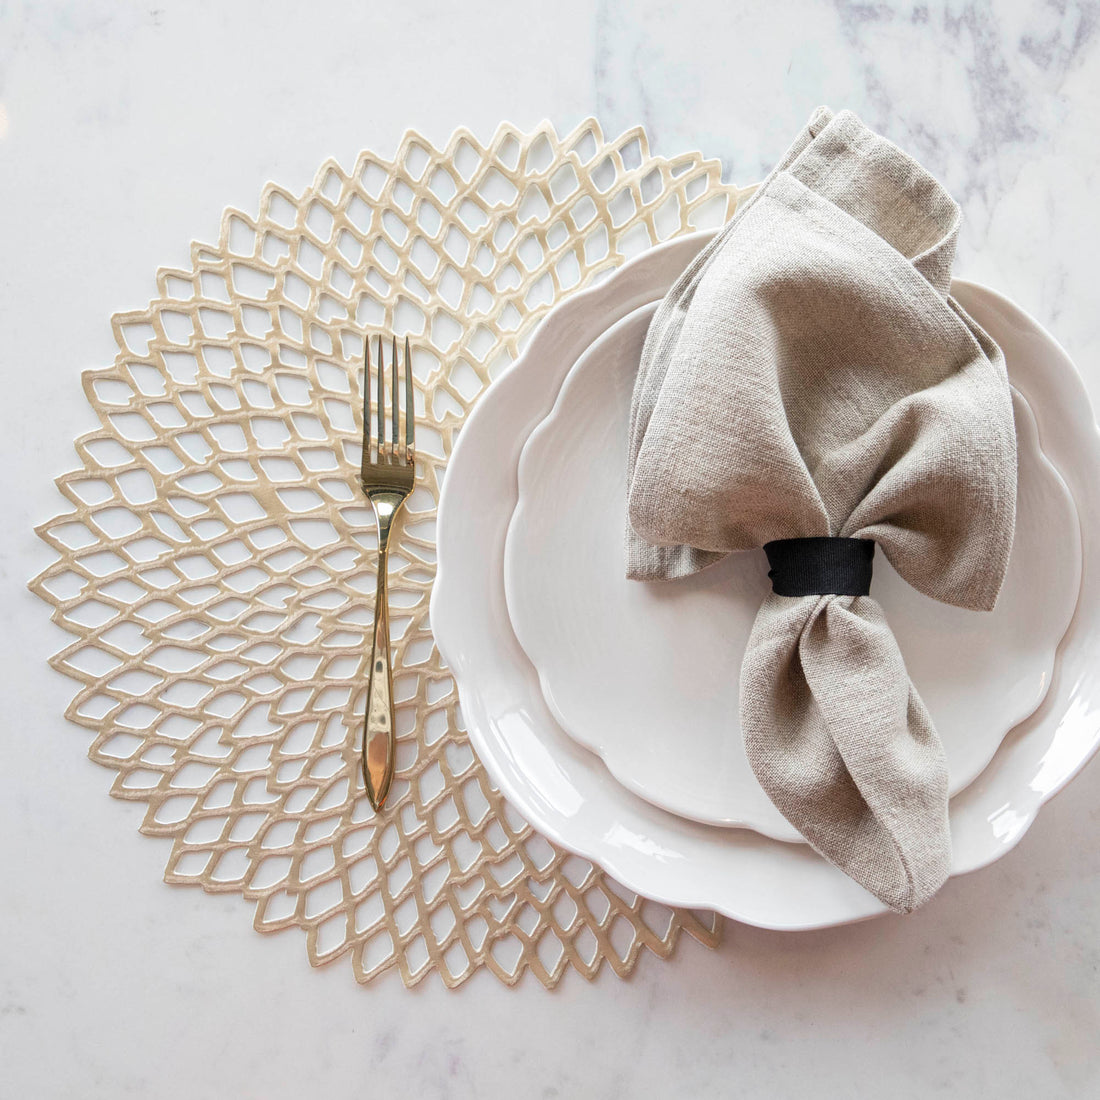 An elegantly set table with a decorative gold Chilewich Pressed Dahlia Mat, white dinner plate, a folded napkin with a ring, and gold silverware.